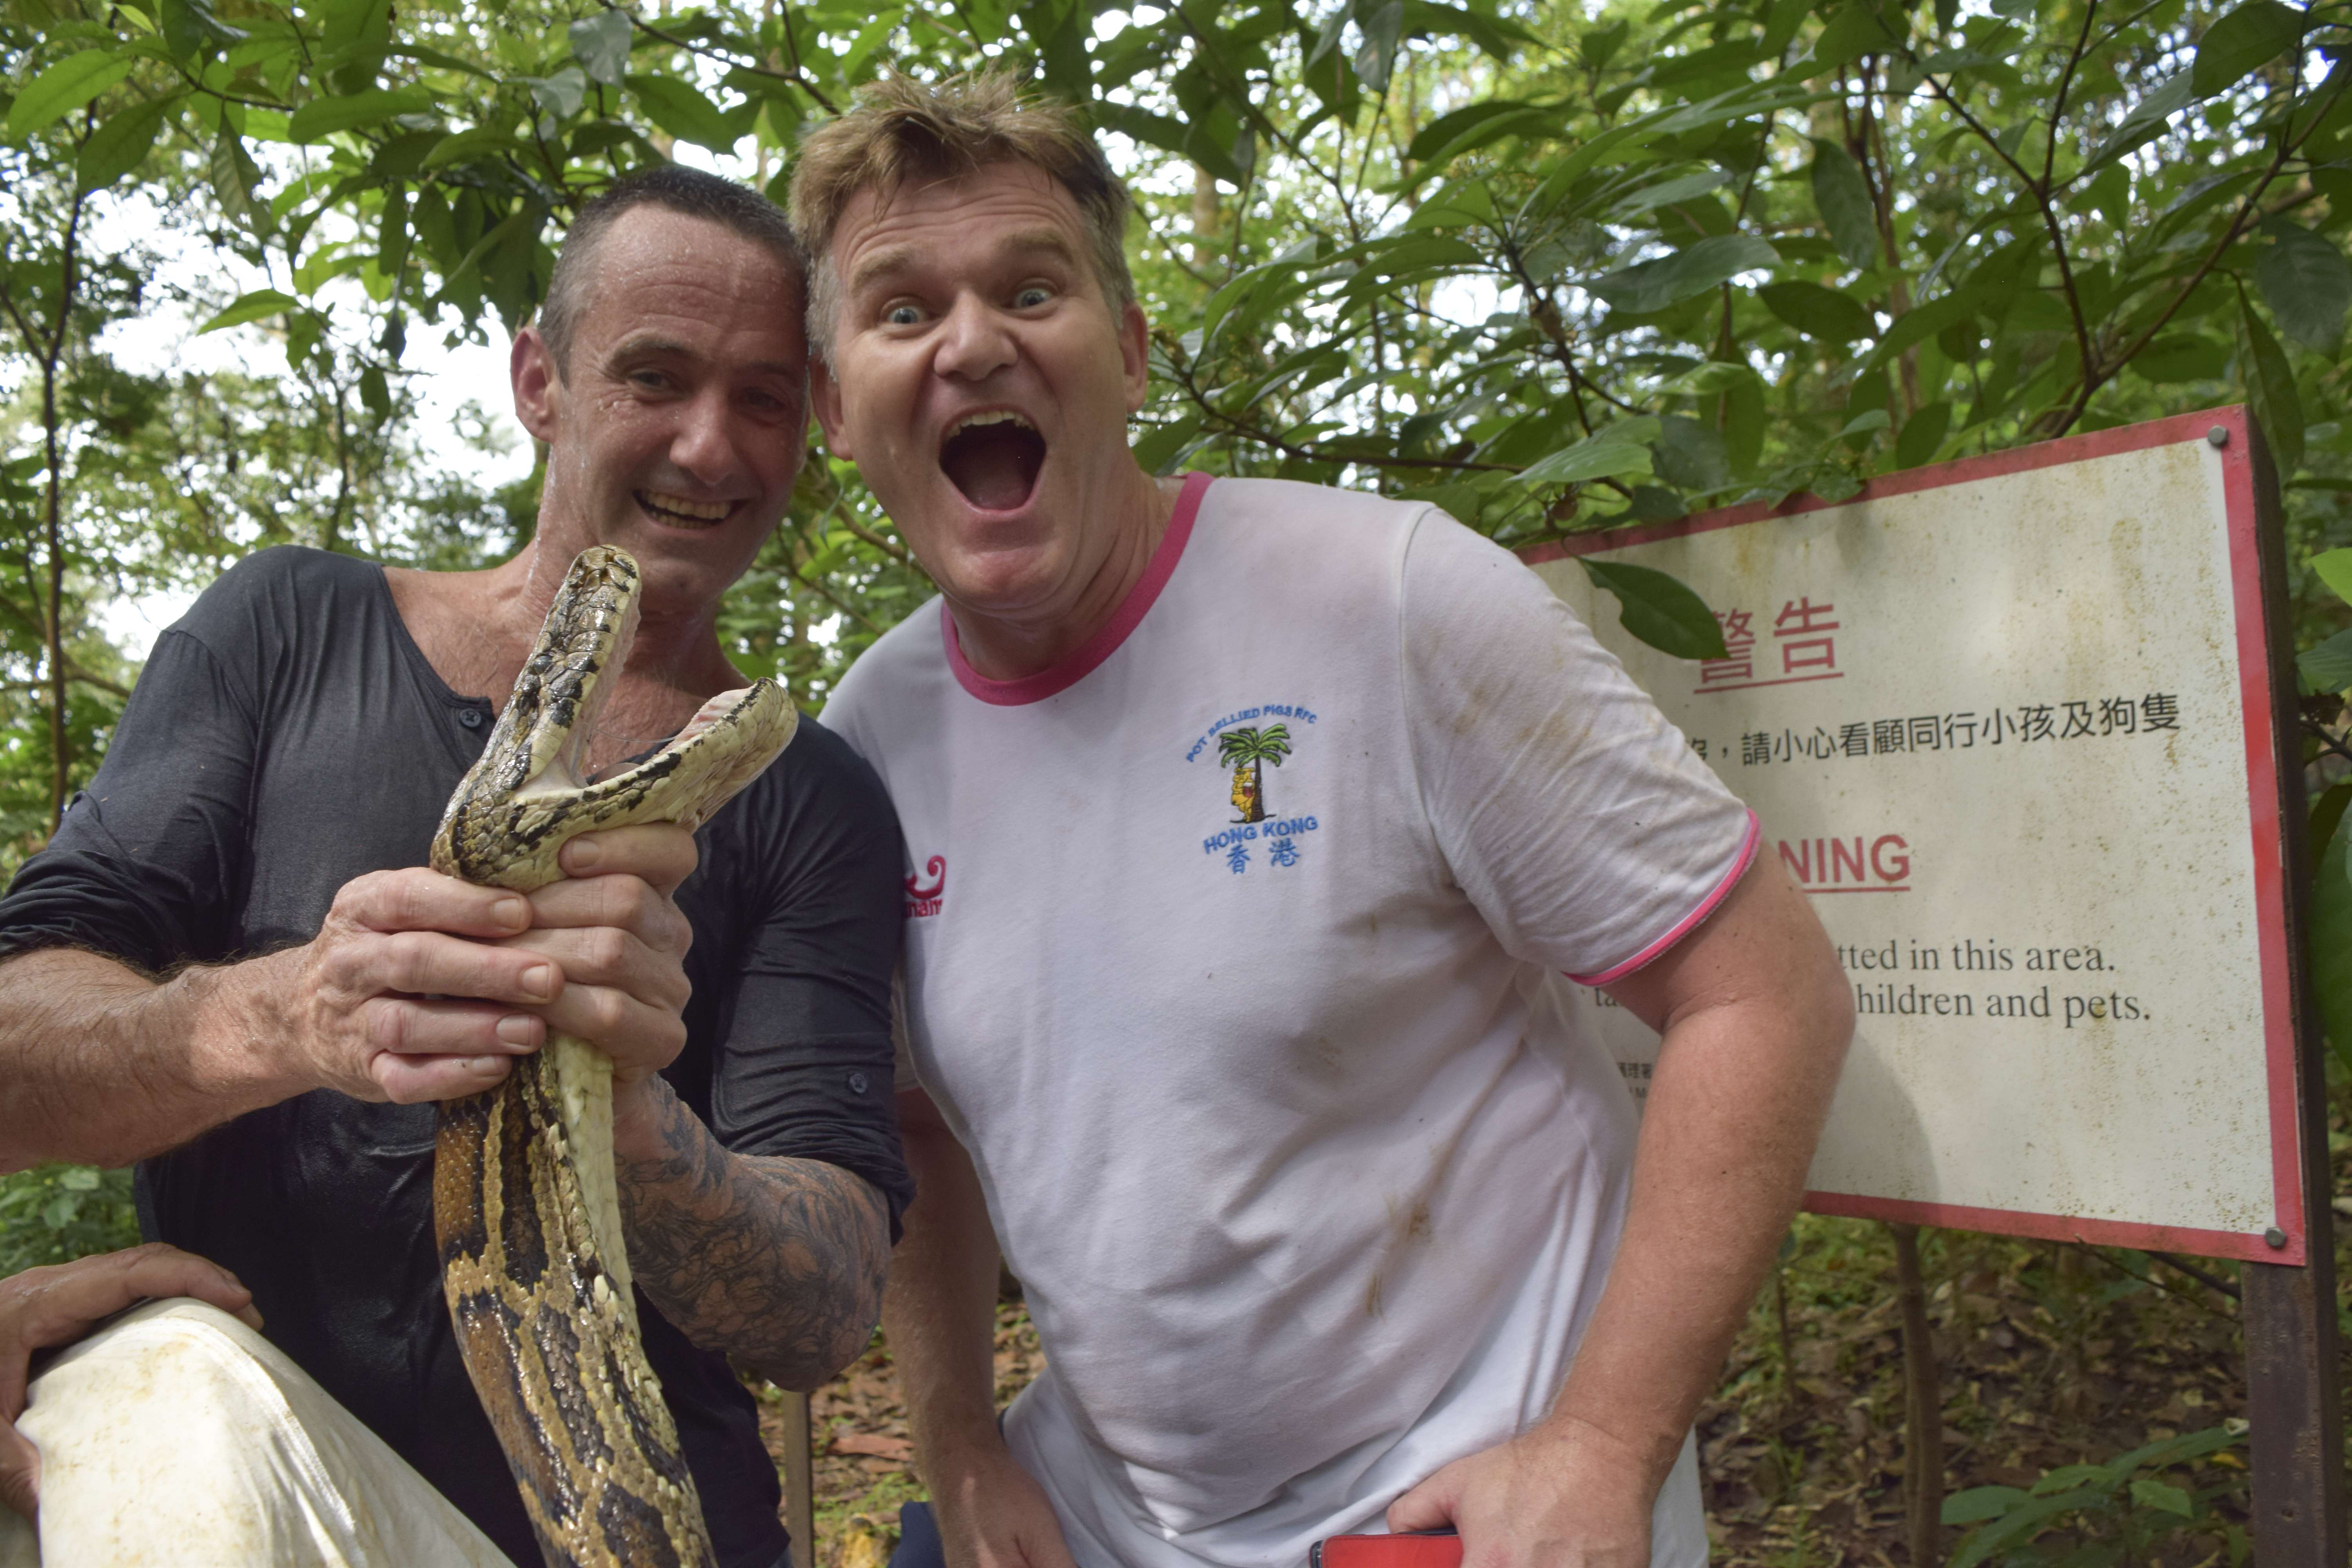 Karl Davies felt able to relax after Dave Willott (left) caught the Burmese python which had sunk its teeth into Davies’ leg two days earlier and tried to grip the 107kg Hong Kong resident in its coils. Photos: Red Door News